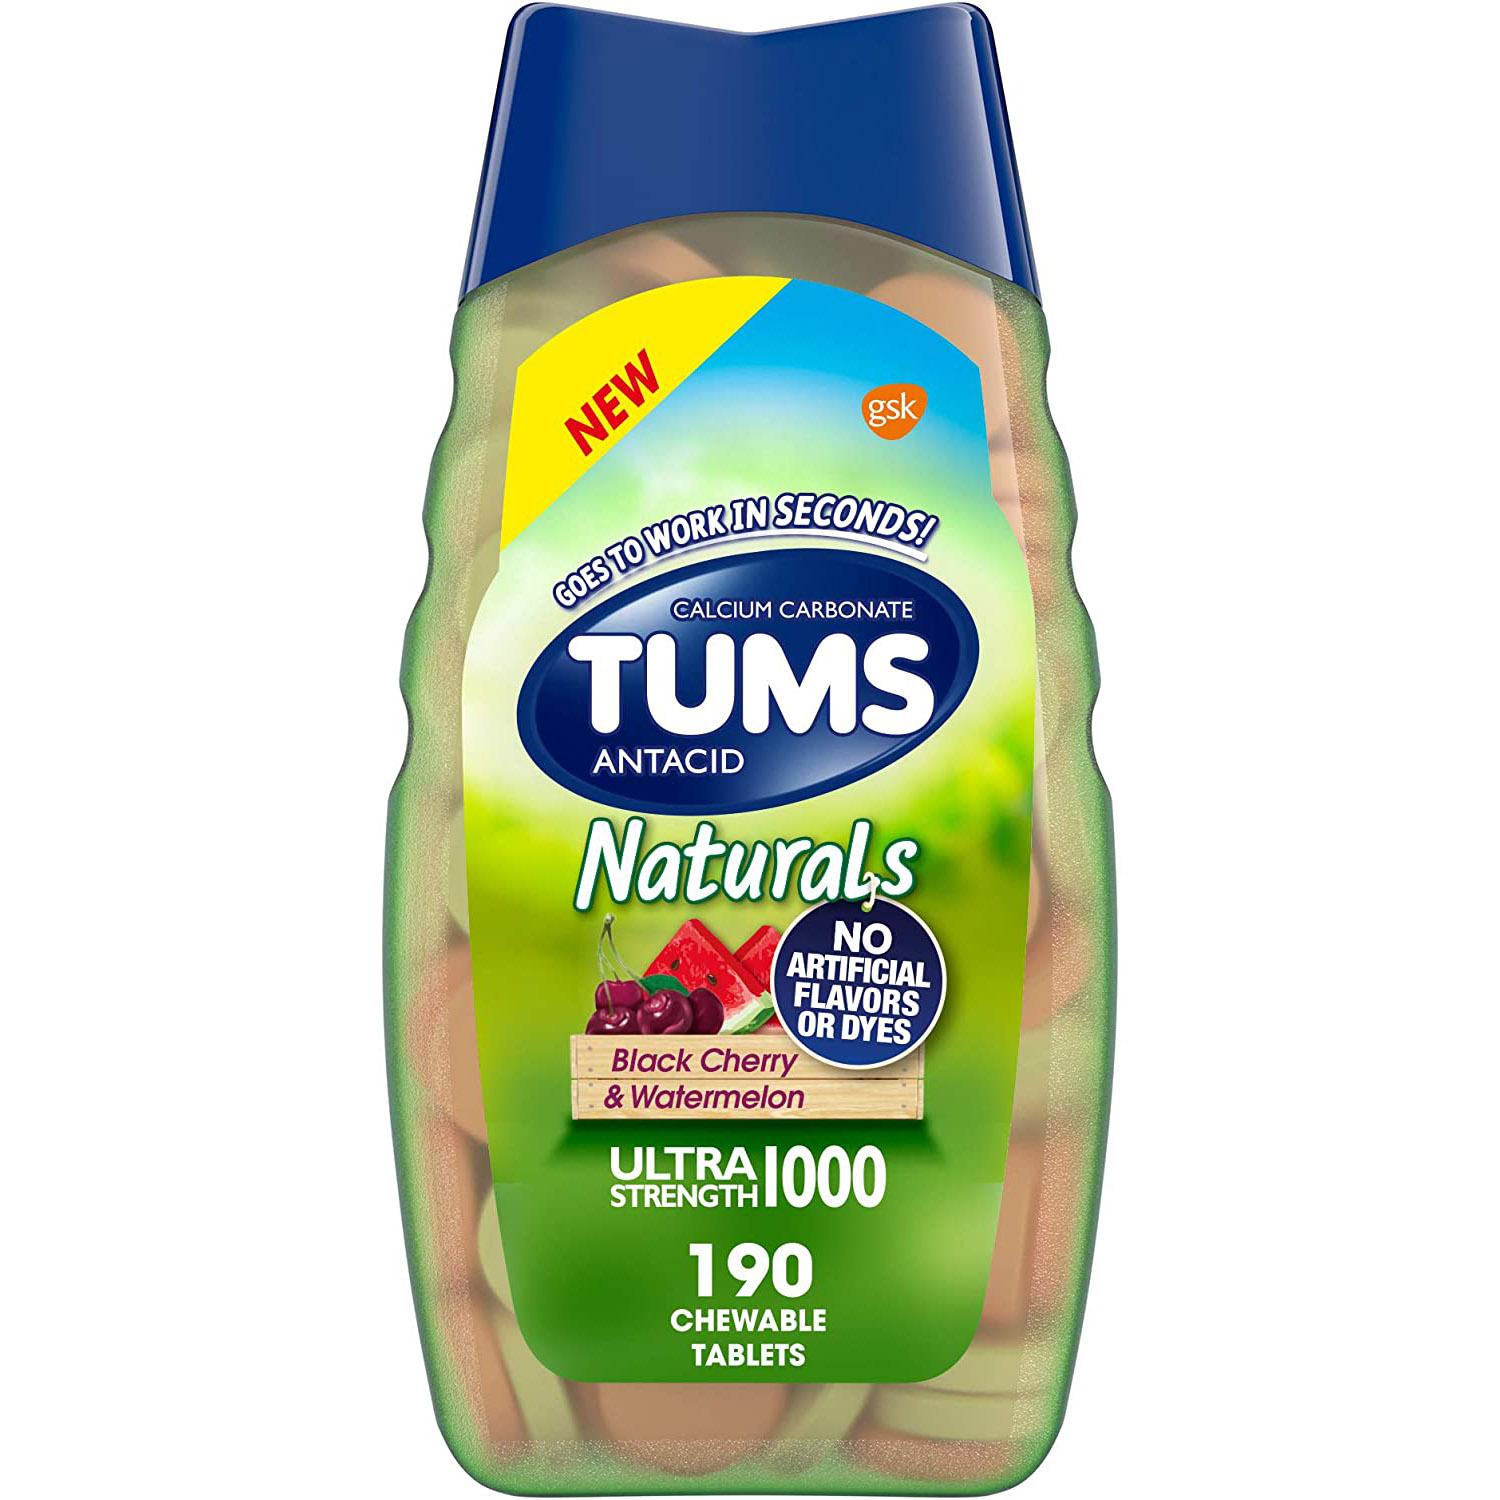 190 Tums Naturals Ultra Strength Antacid Chews for $4.75 Shipped